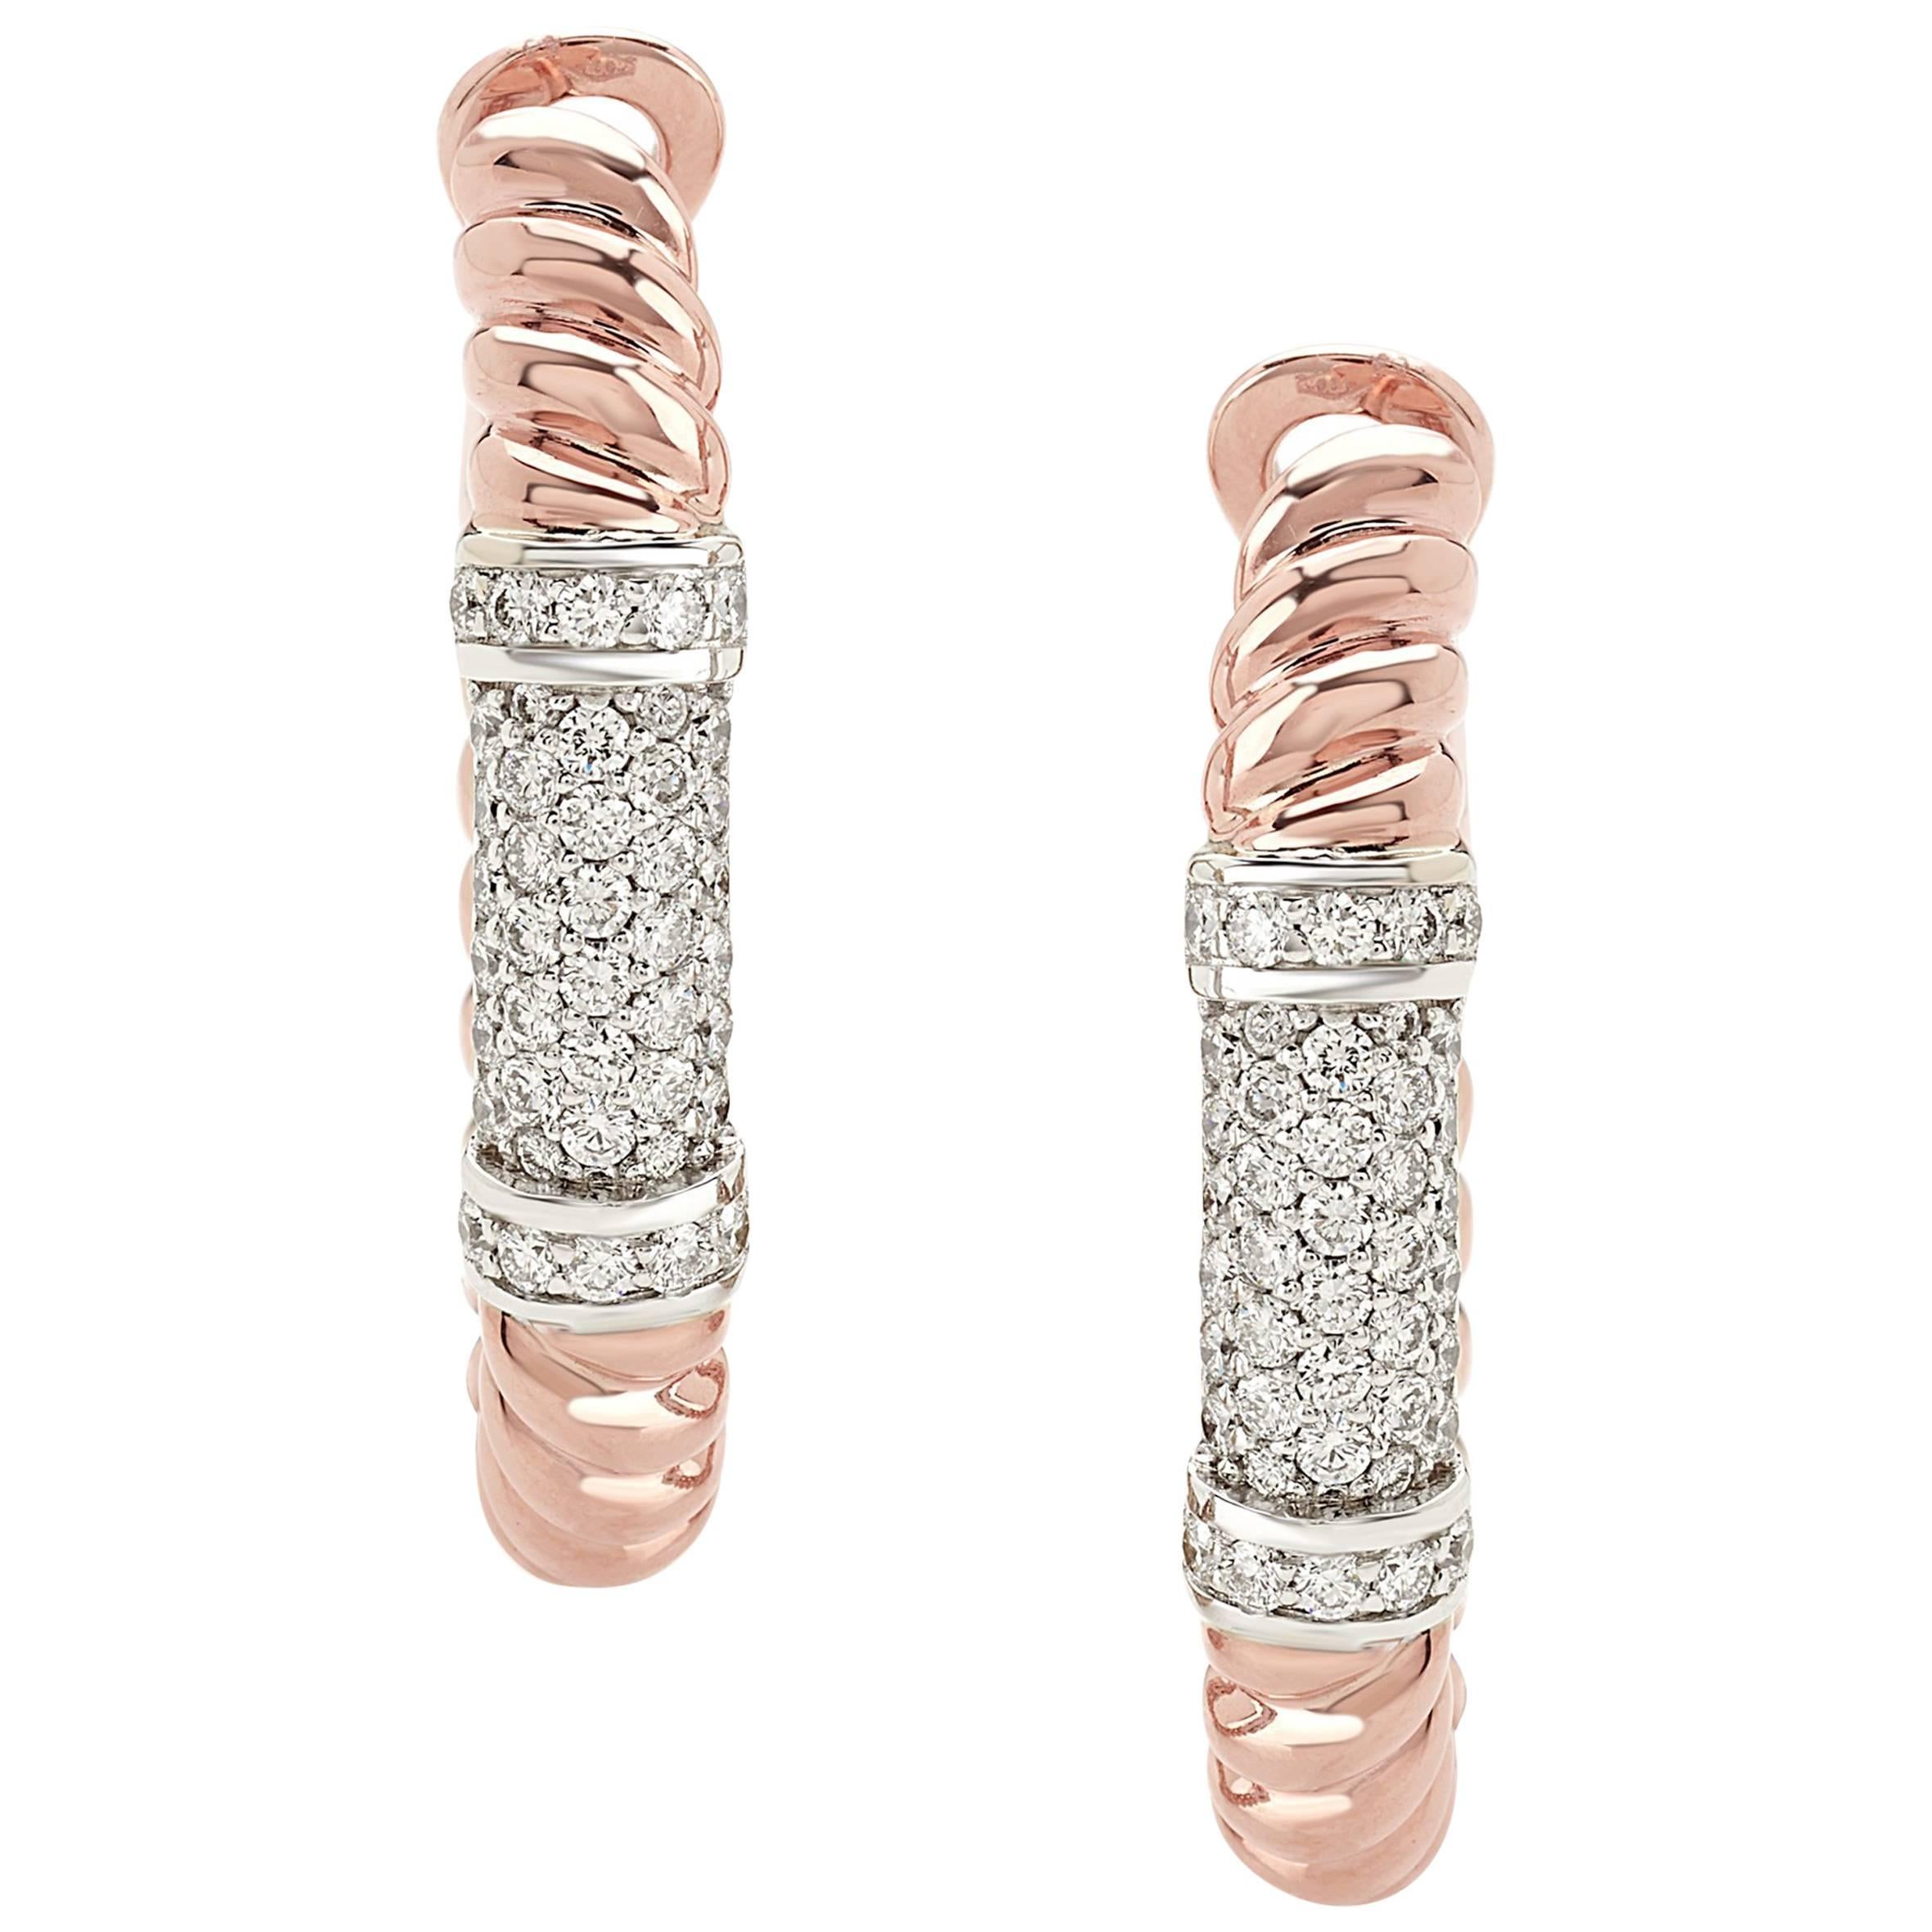 Pair of Earrings from the Collection "Rope" 18 Karat Rose Gold and Diamonds